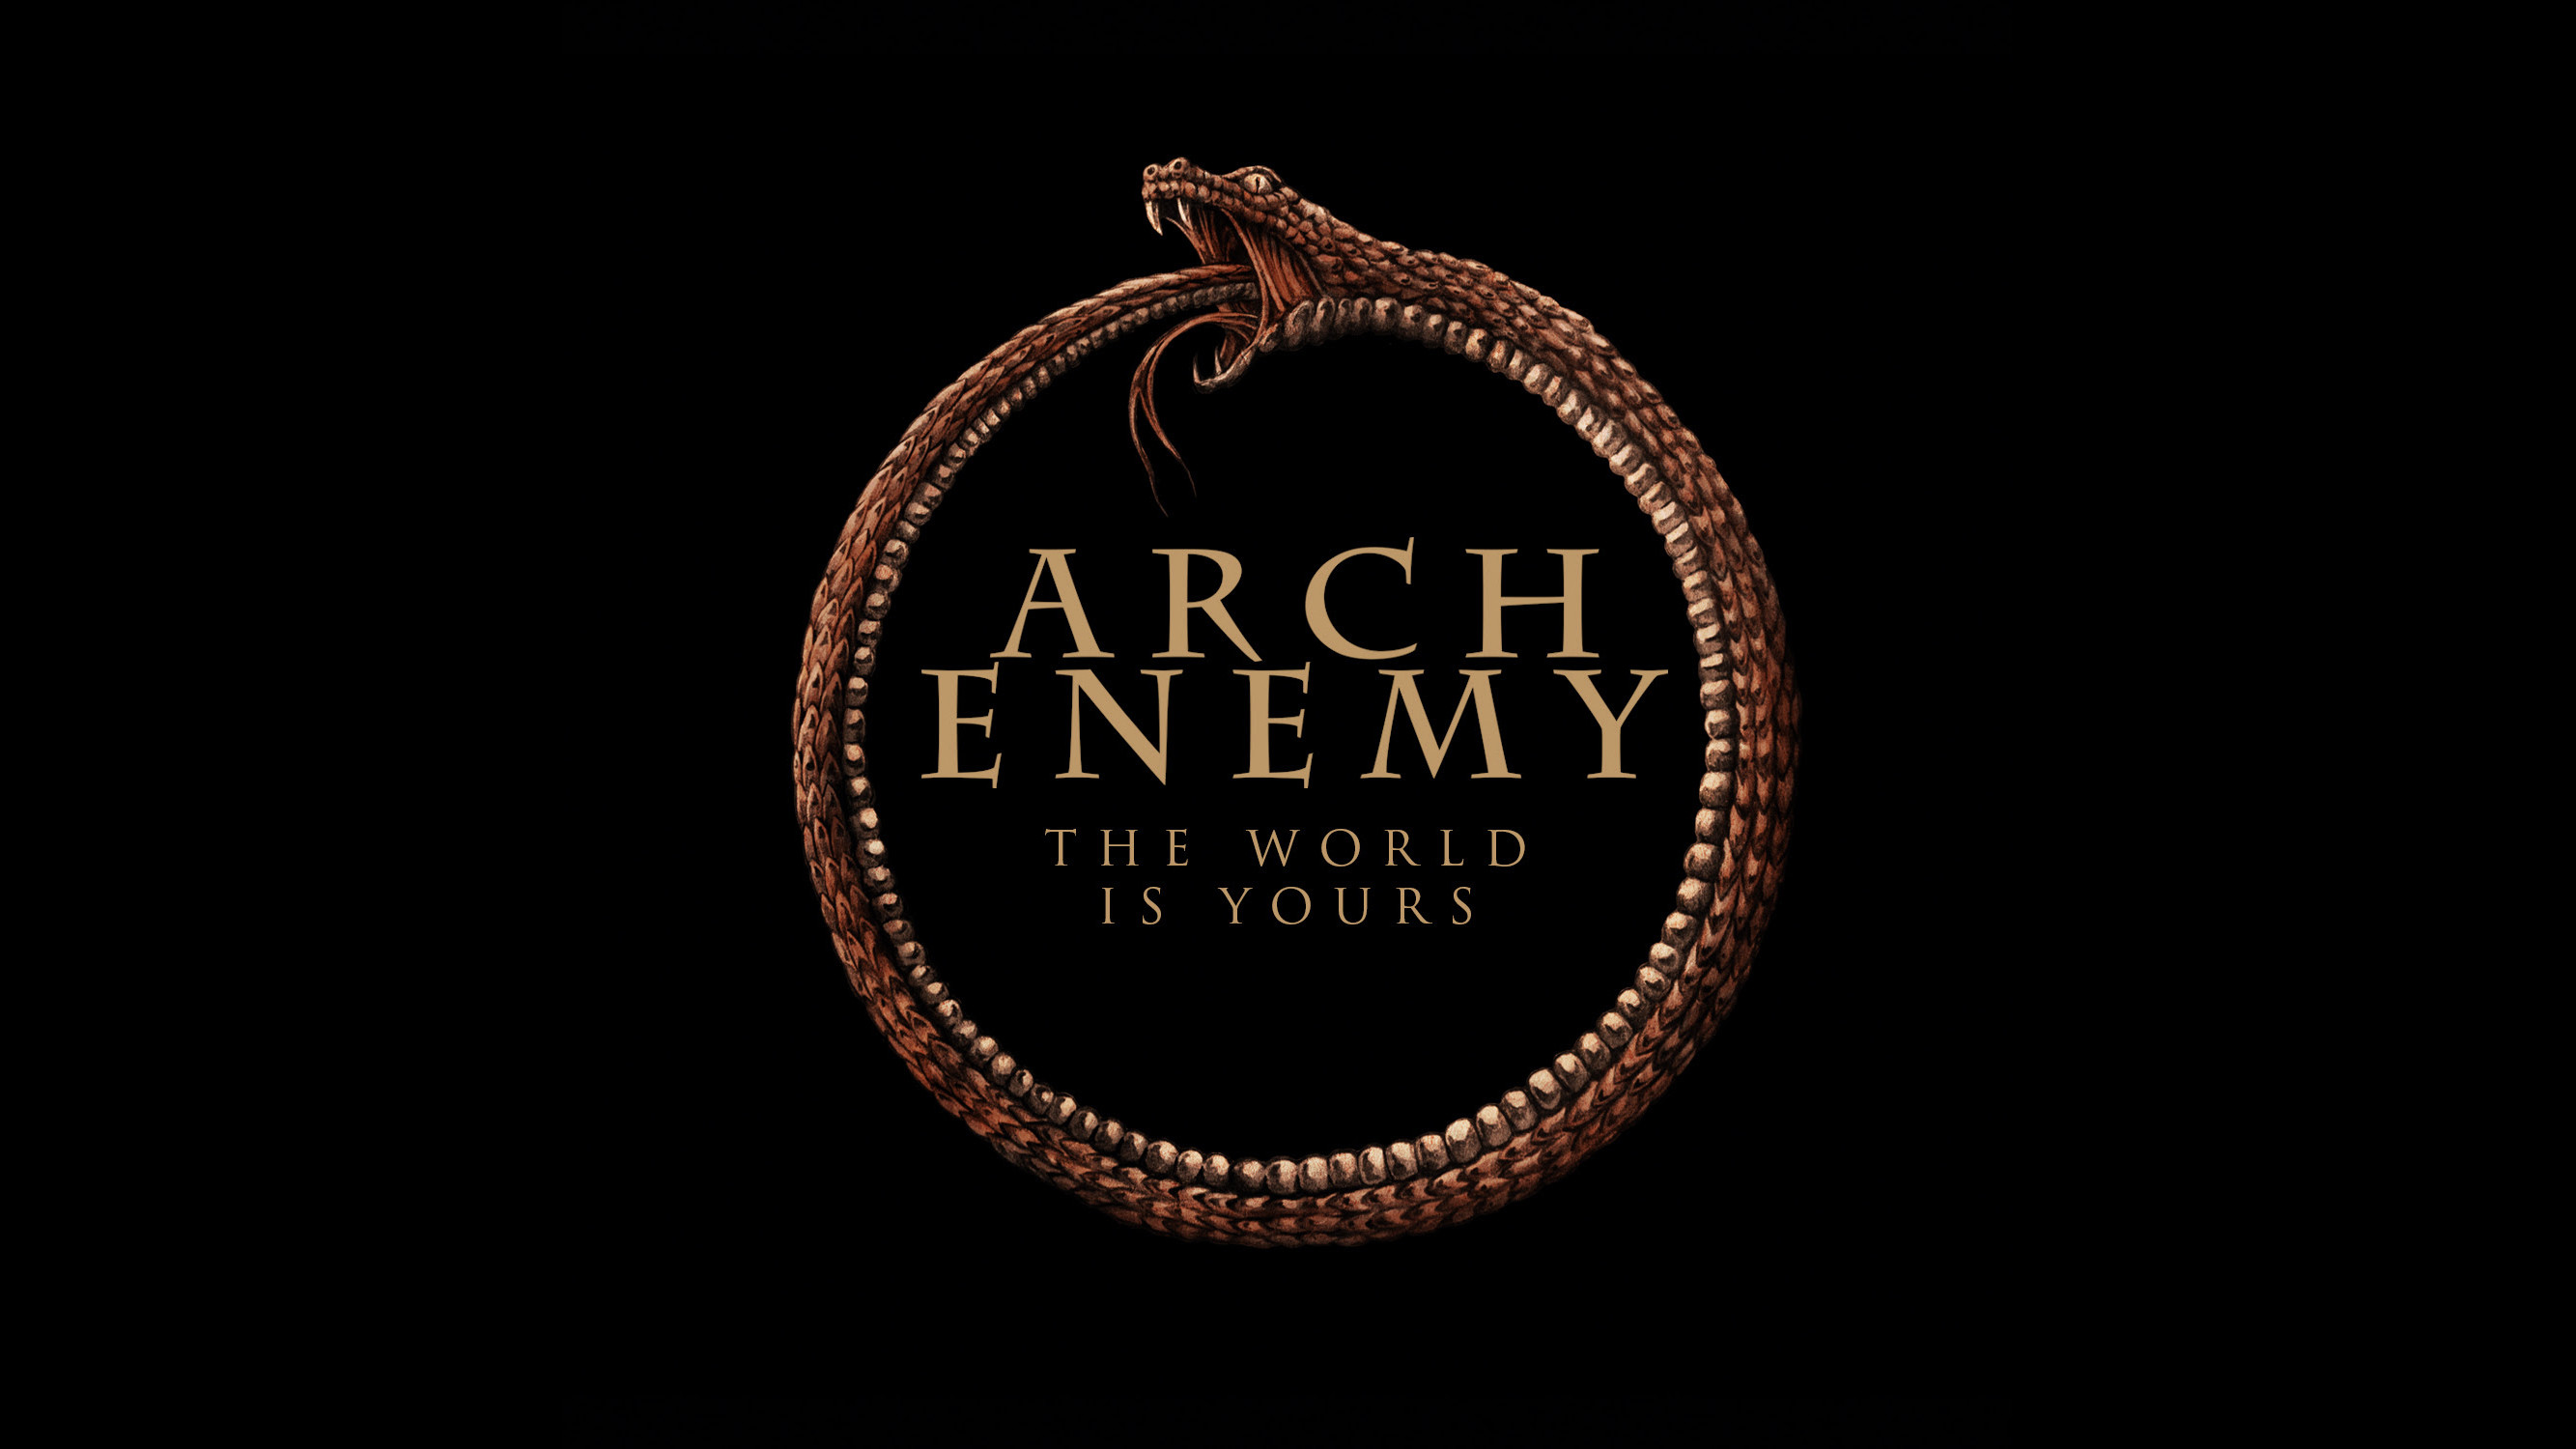 2667x1500 ... ARCH ENEMY - The World Is Yours [WALLPAPER] by disturbedkorea